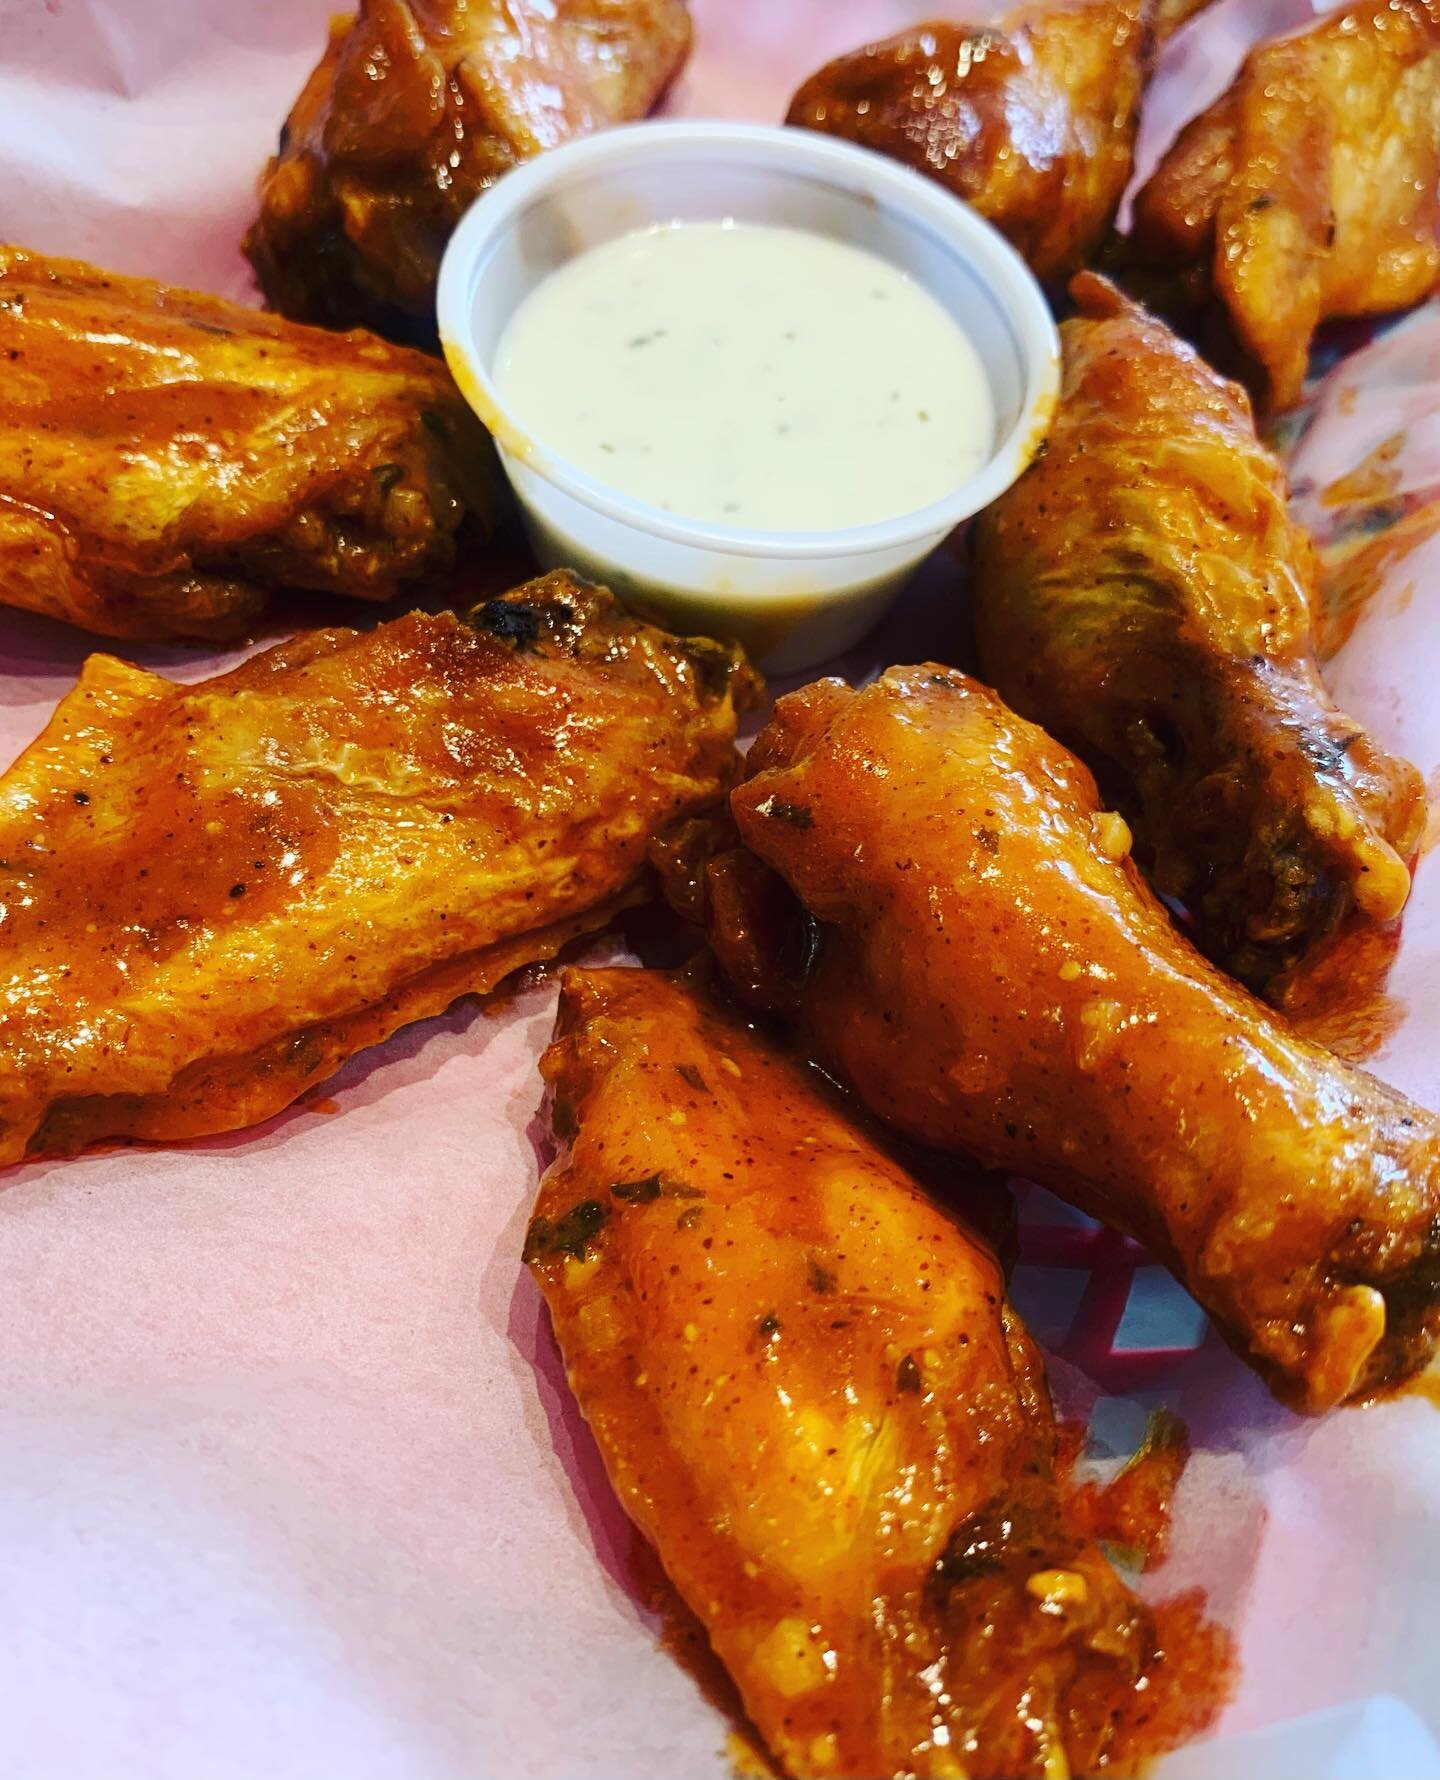 Come check out these delicious wings !!!!!! 5 different flavors to choose from!!!!
#buffalowings #wings #foodporn #burger #planotx #richardsontx

Contact Us
🌐 www.nestburgers.com
📞 +1 972-881-5272
👤 info@nestburgers.com